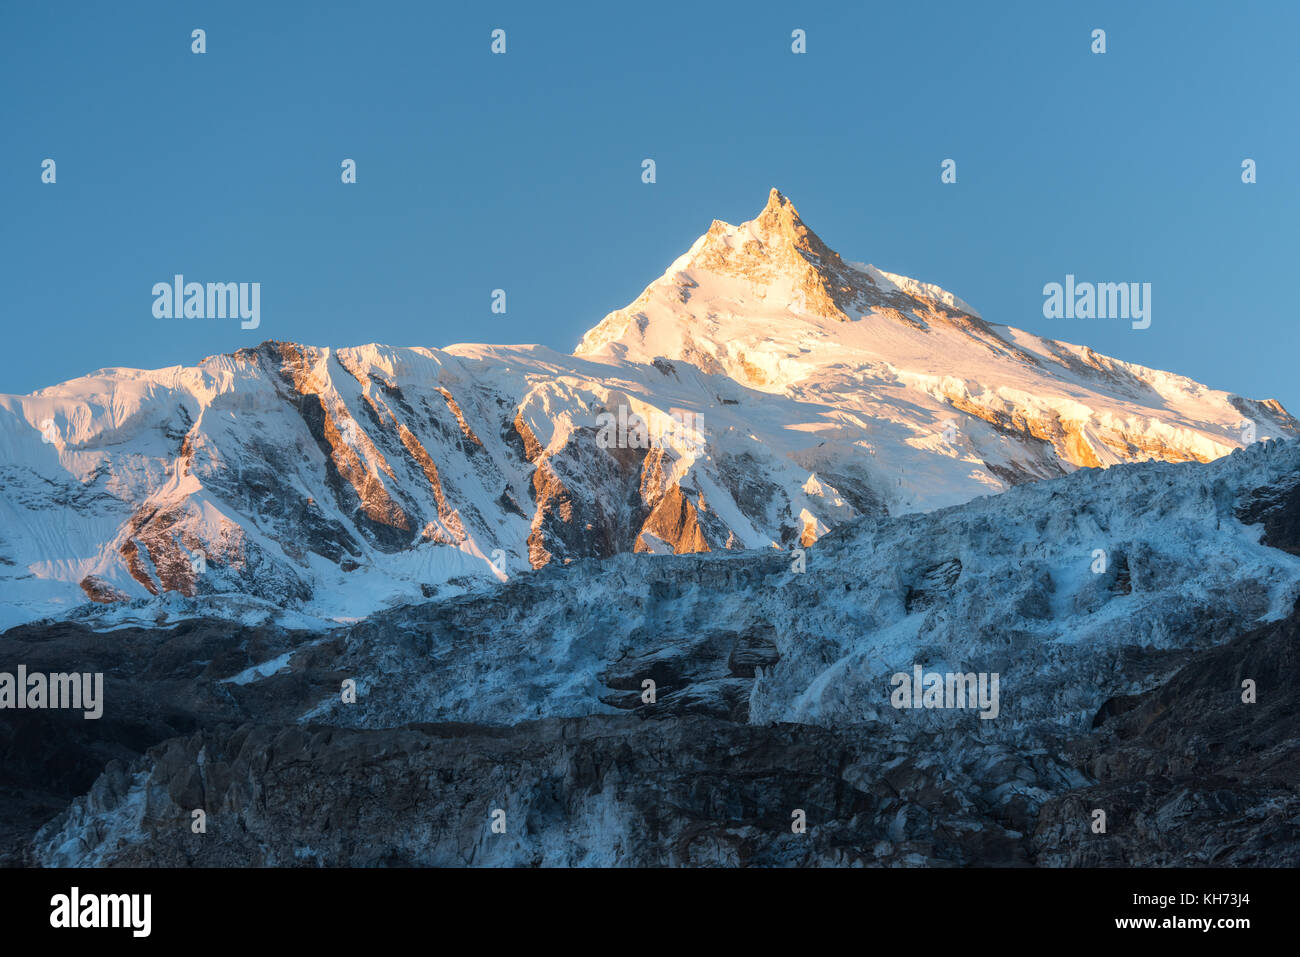 Beautiful view of snow-covered mountain at colorful sunrise in Nepal. Landscape with snowy peaks of Himalayan mountains, glacier and blue sky in the m Stock Photo